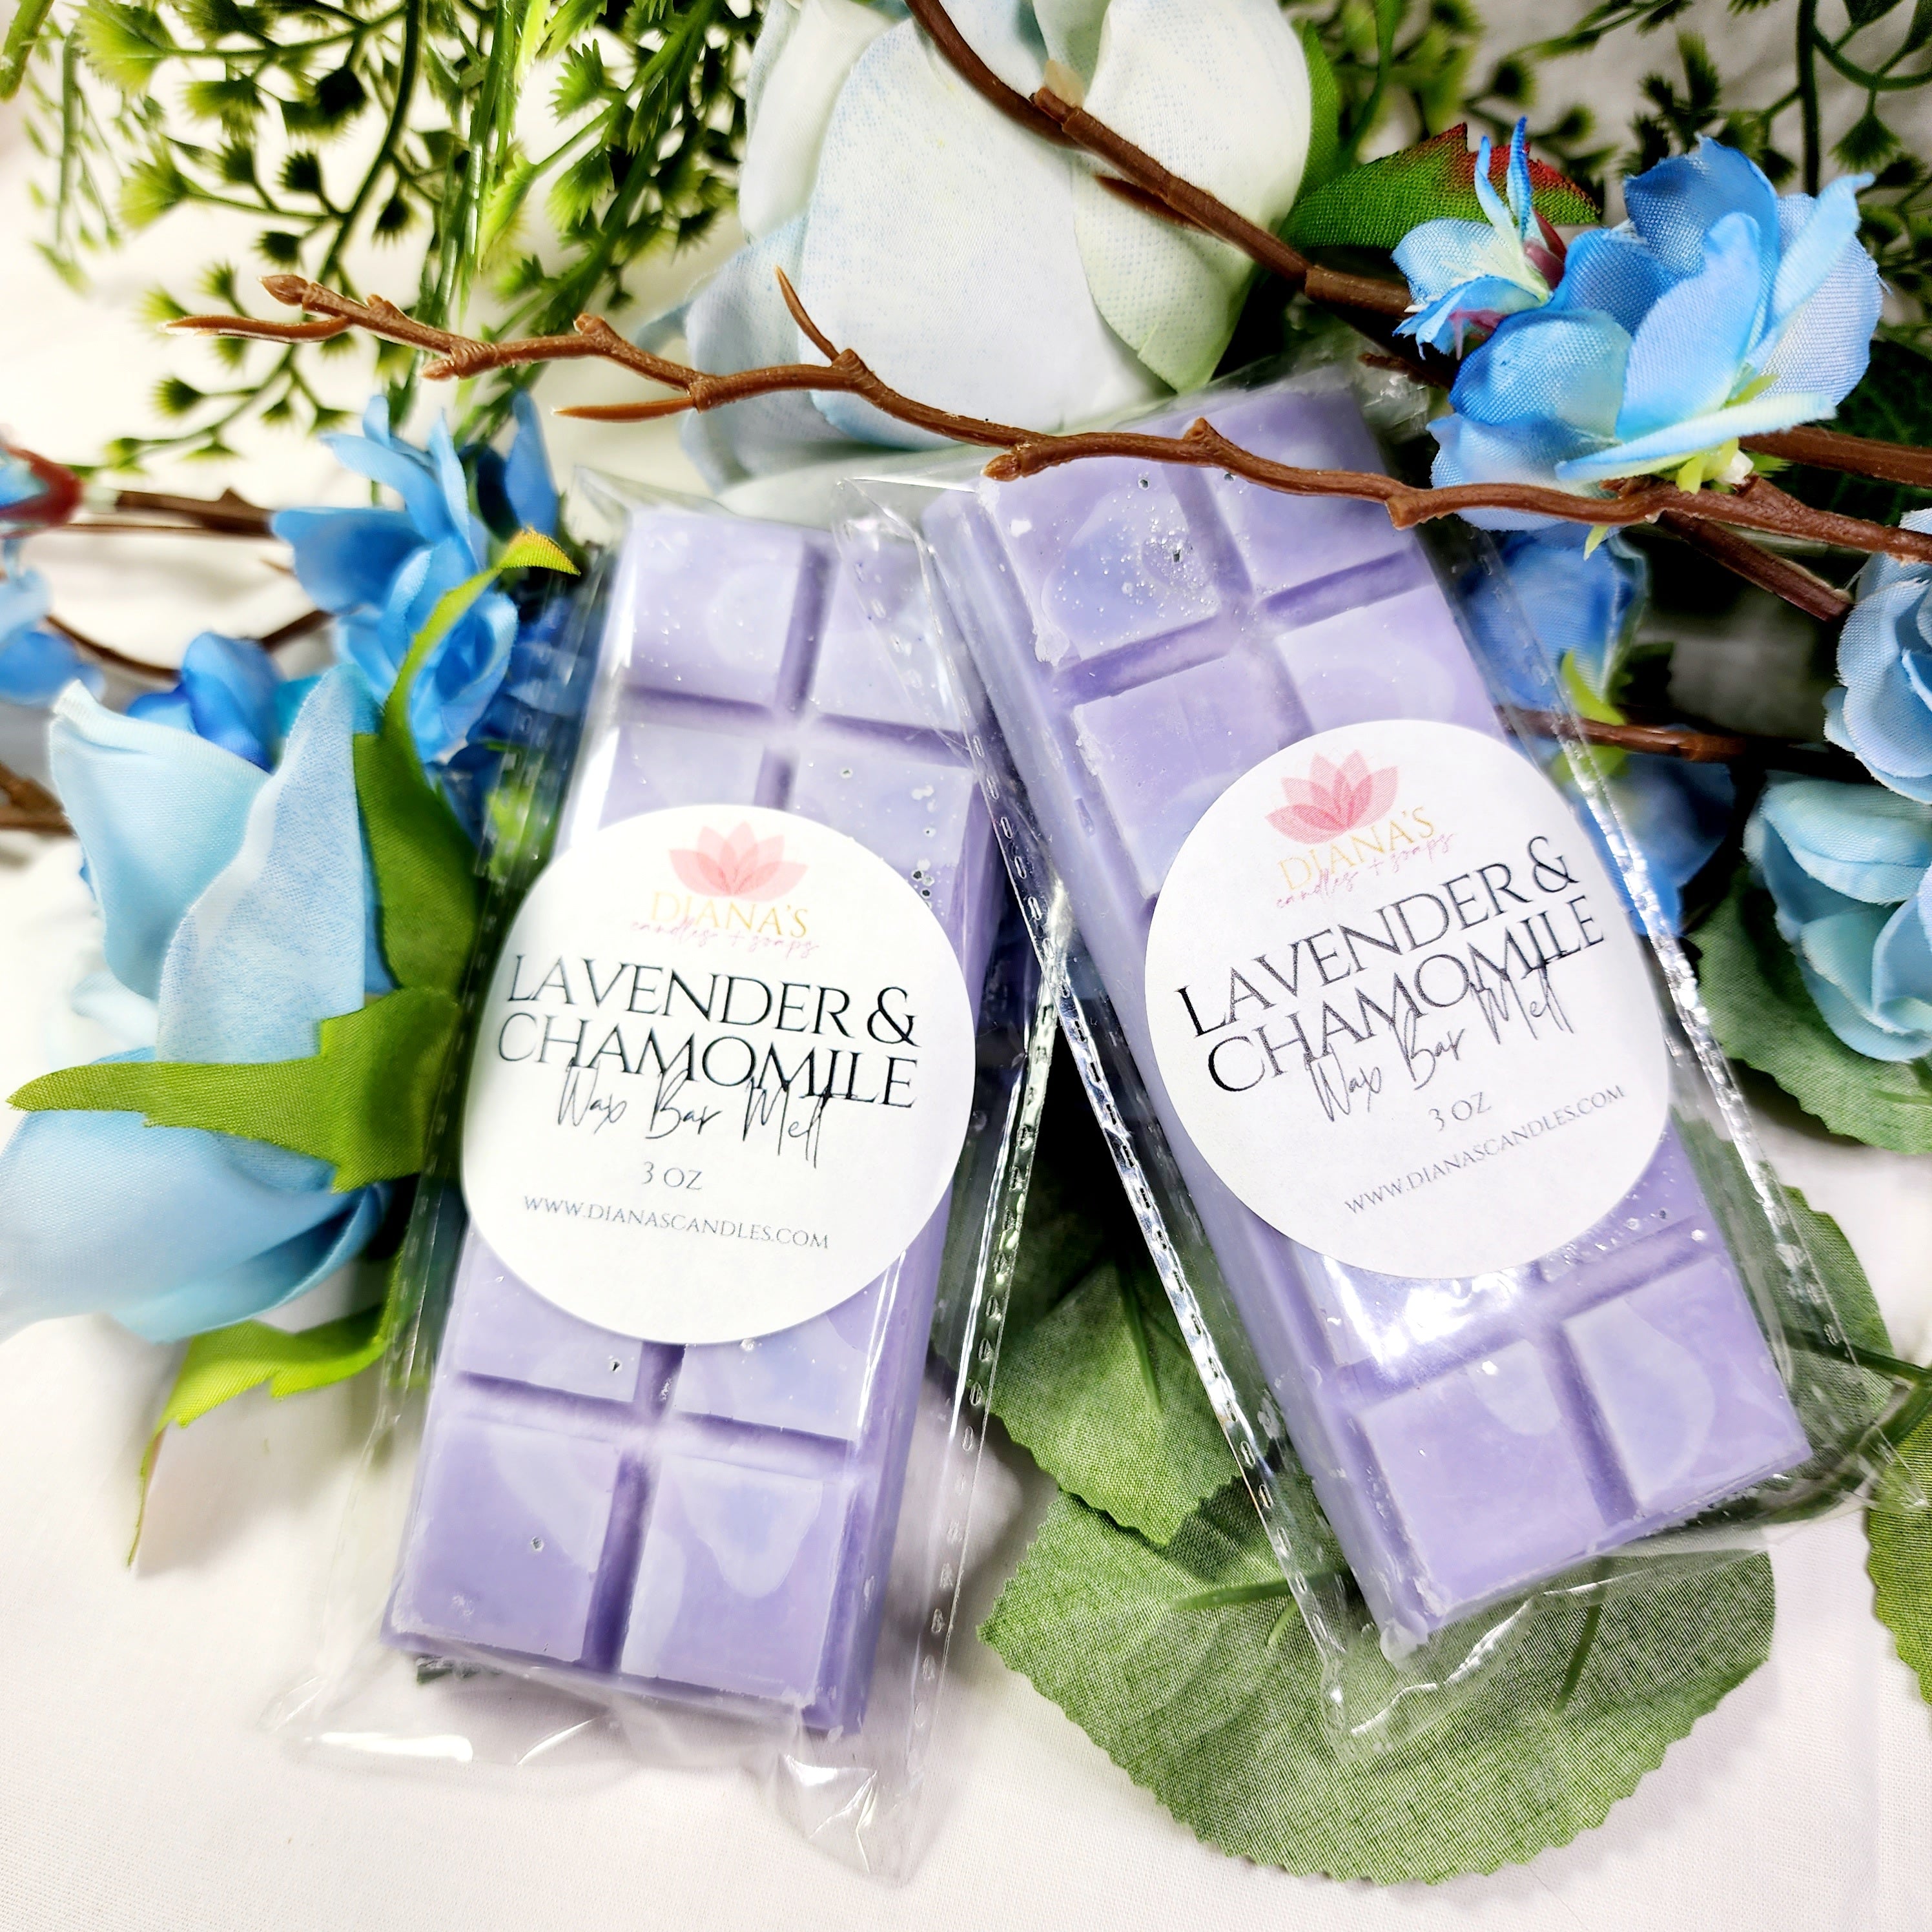 Lavender & Chamomile Wax Snap Bar Diana's Candles and Soaps 